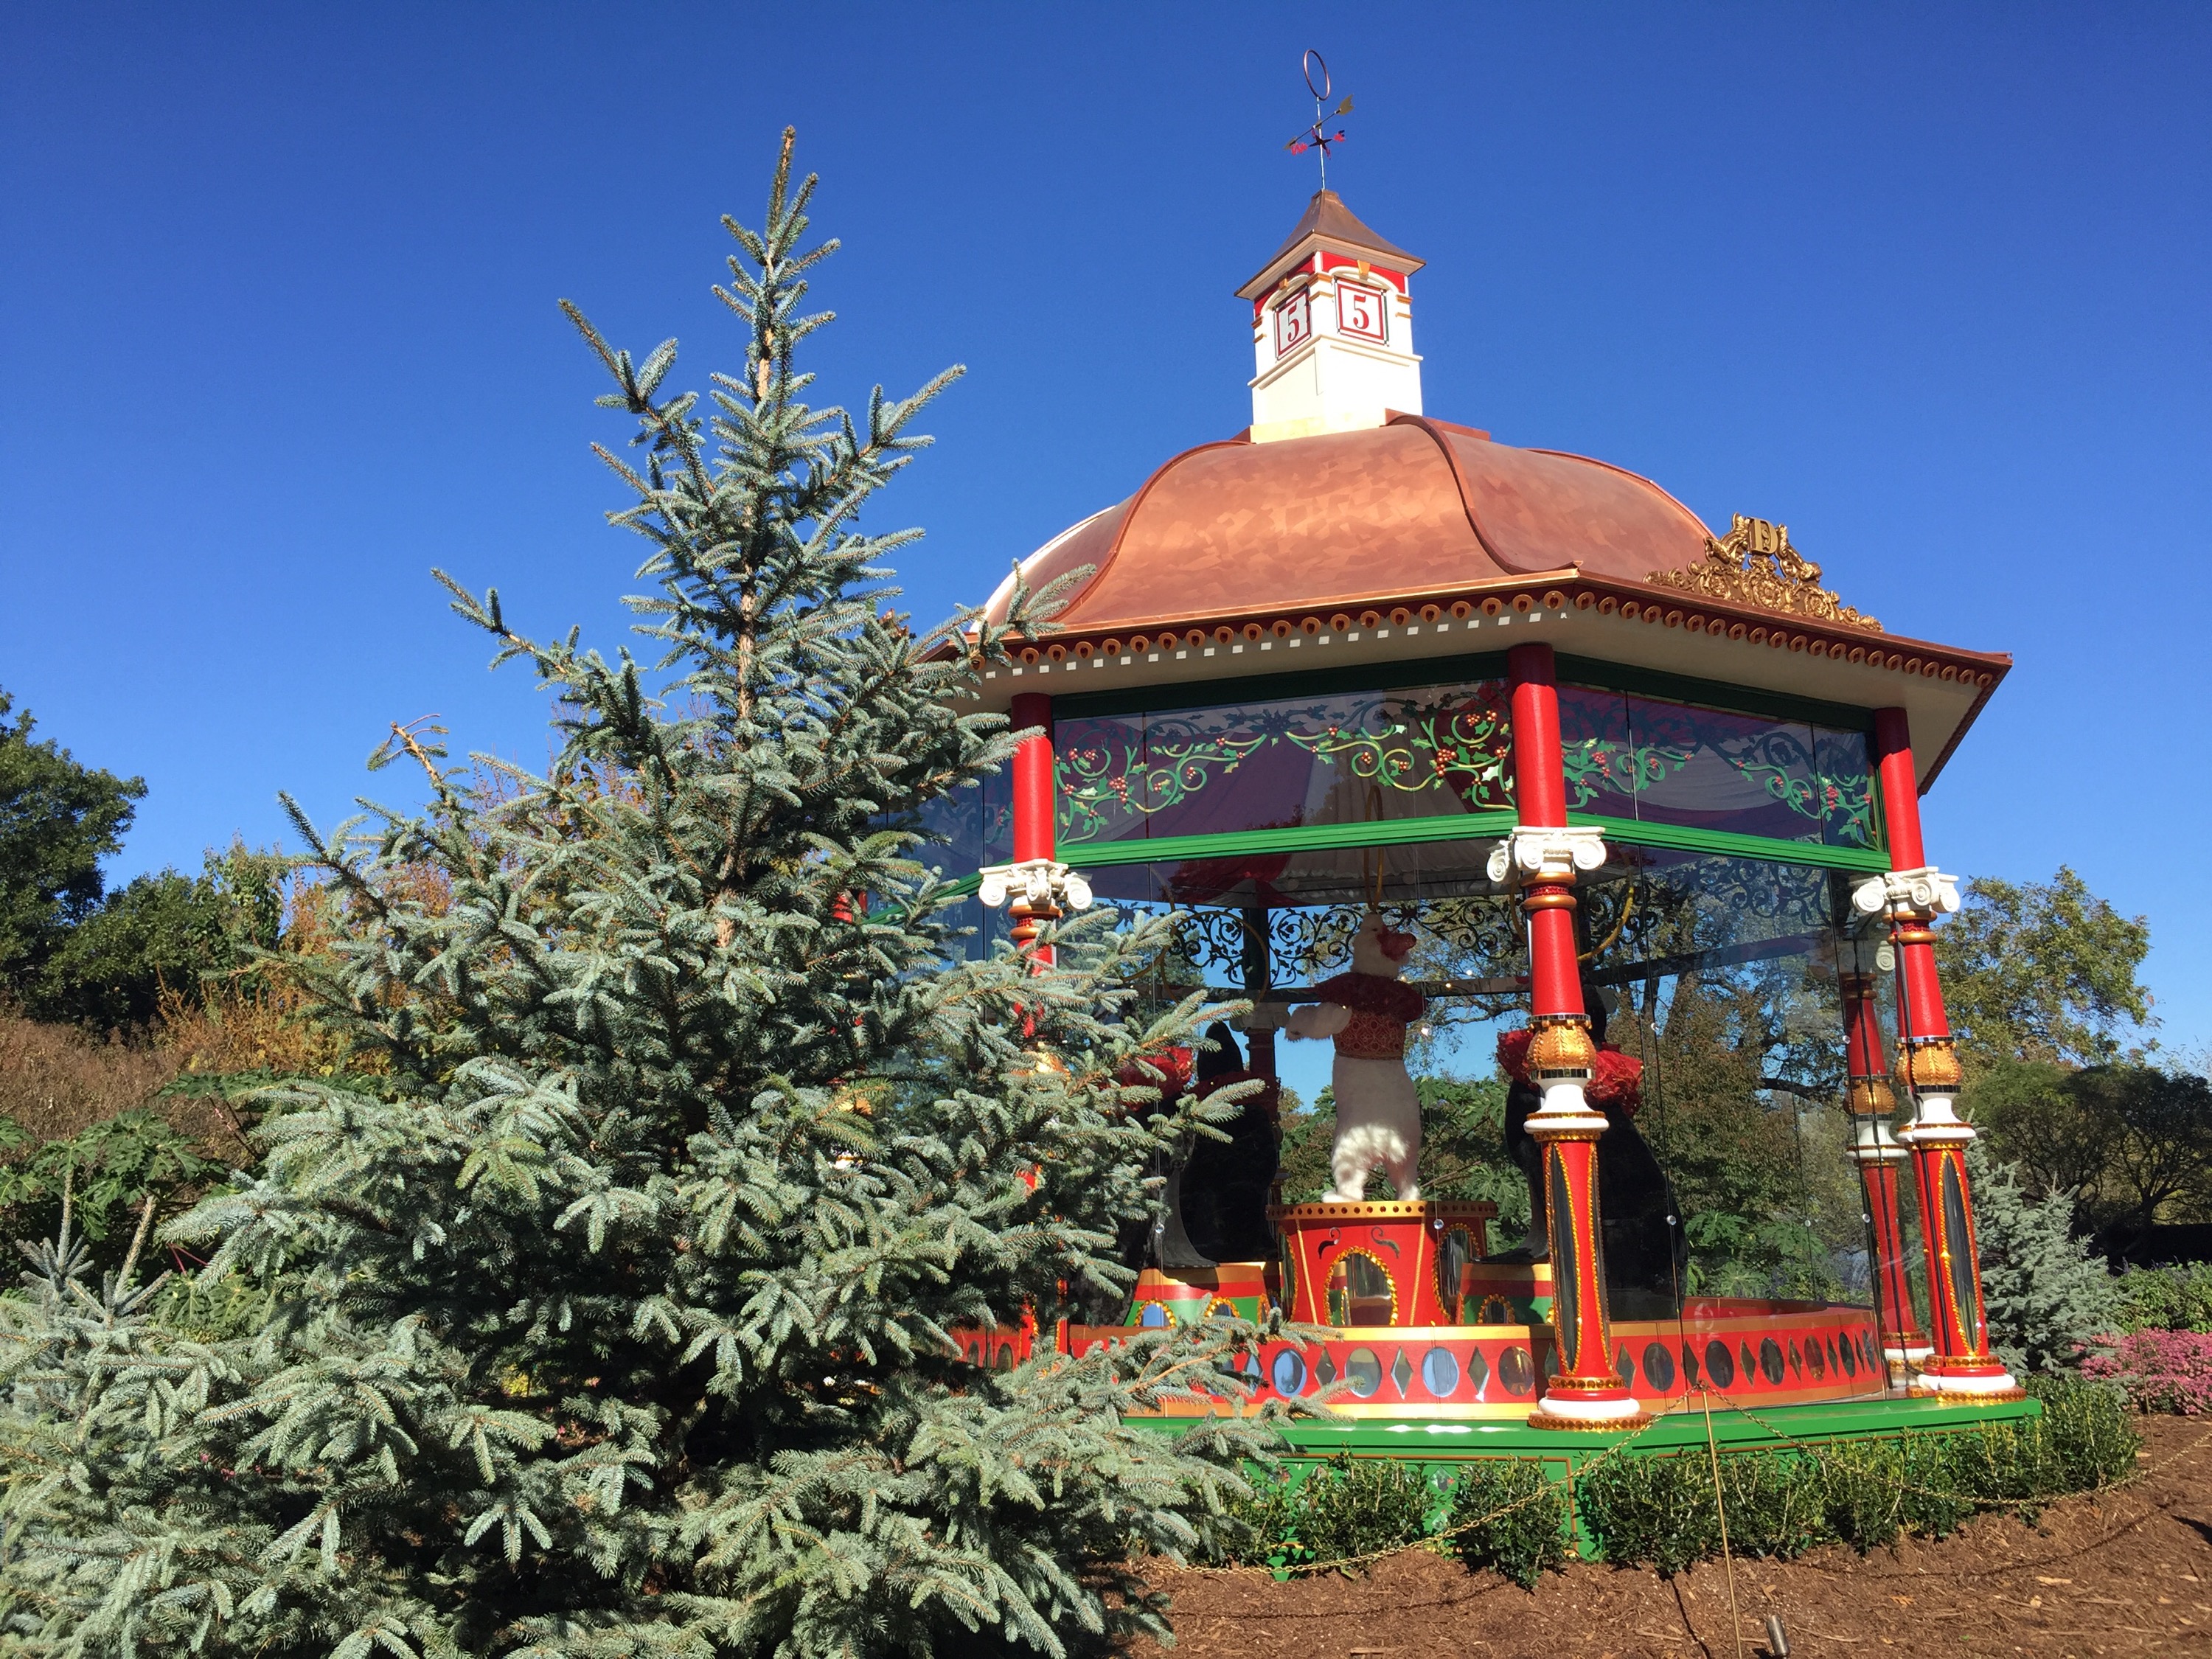 The 12 Days of Christmas at Dallas Arboretum | The Rose Table